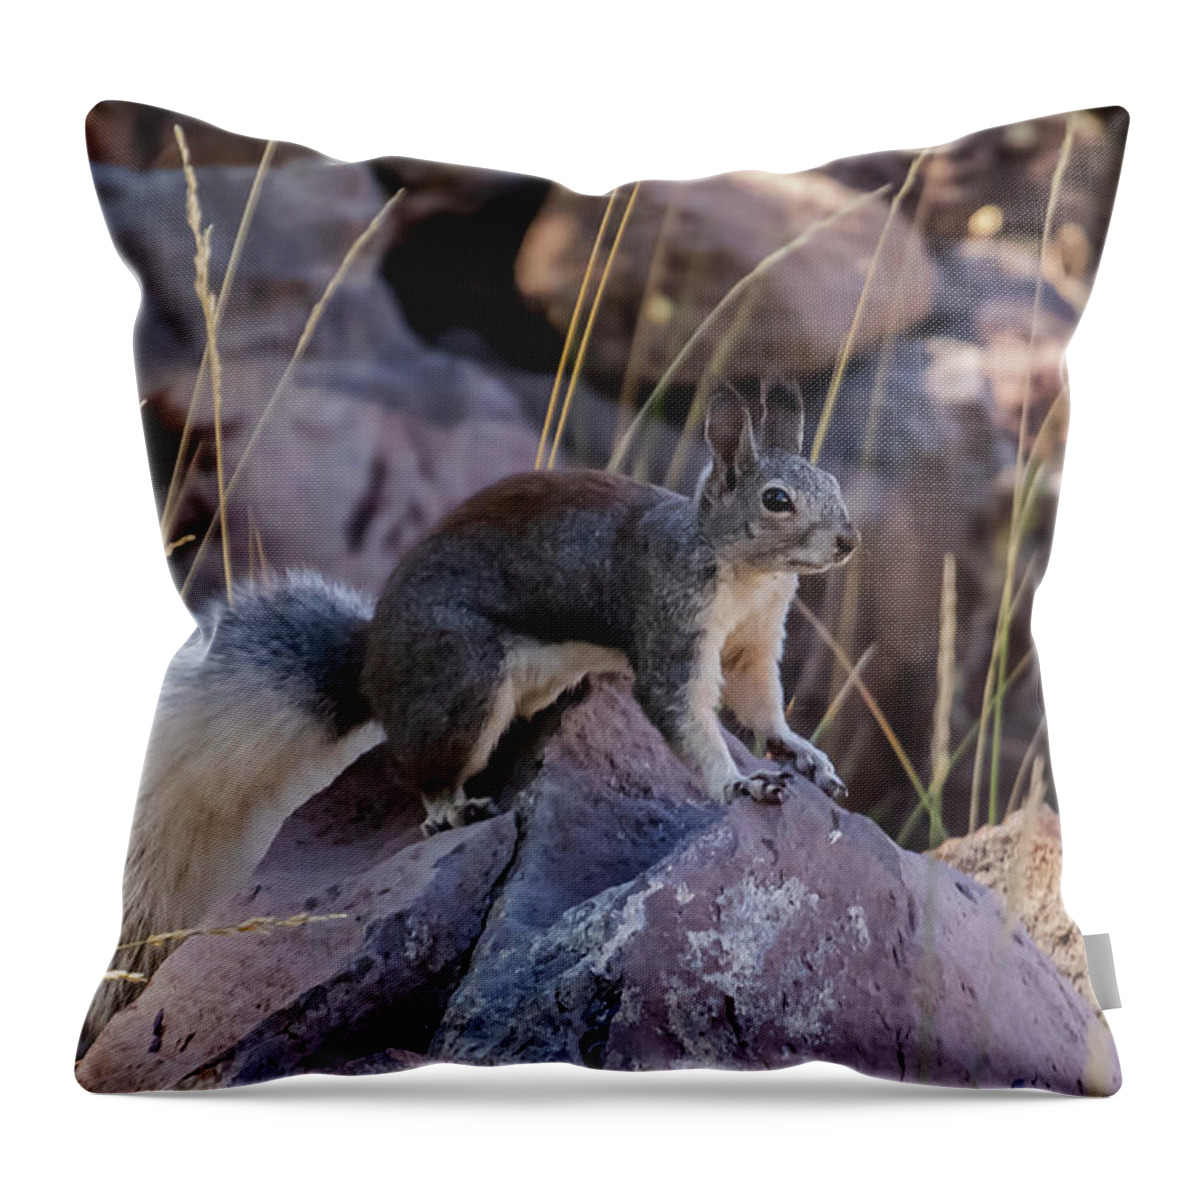 Squirrel Throw Pillow featuring the photograph Abert's Squirrel by Laura Putman